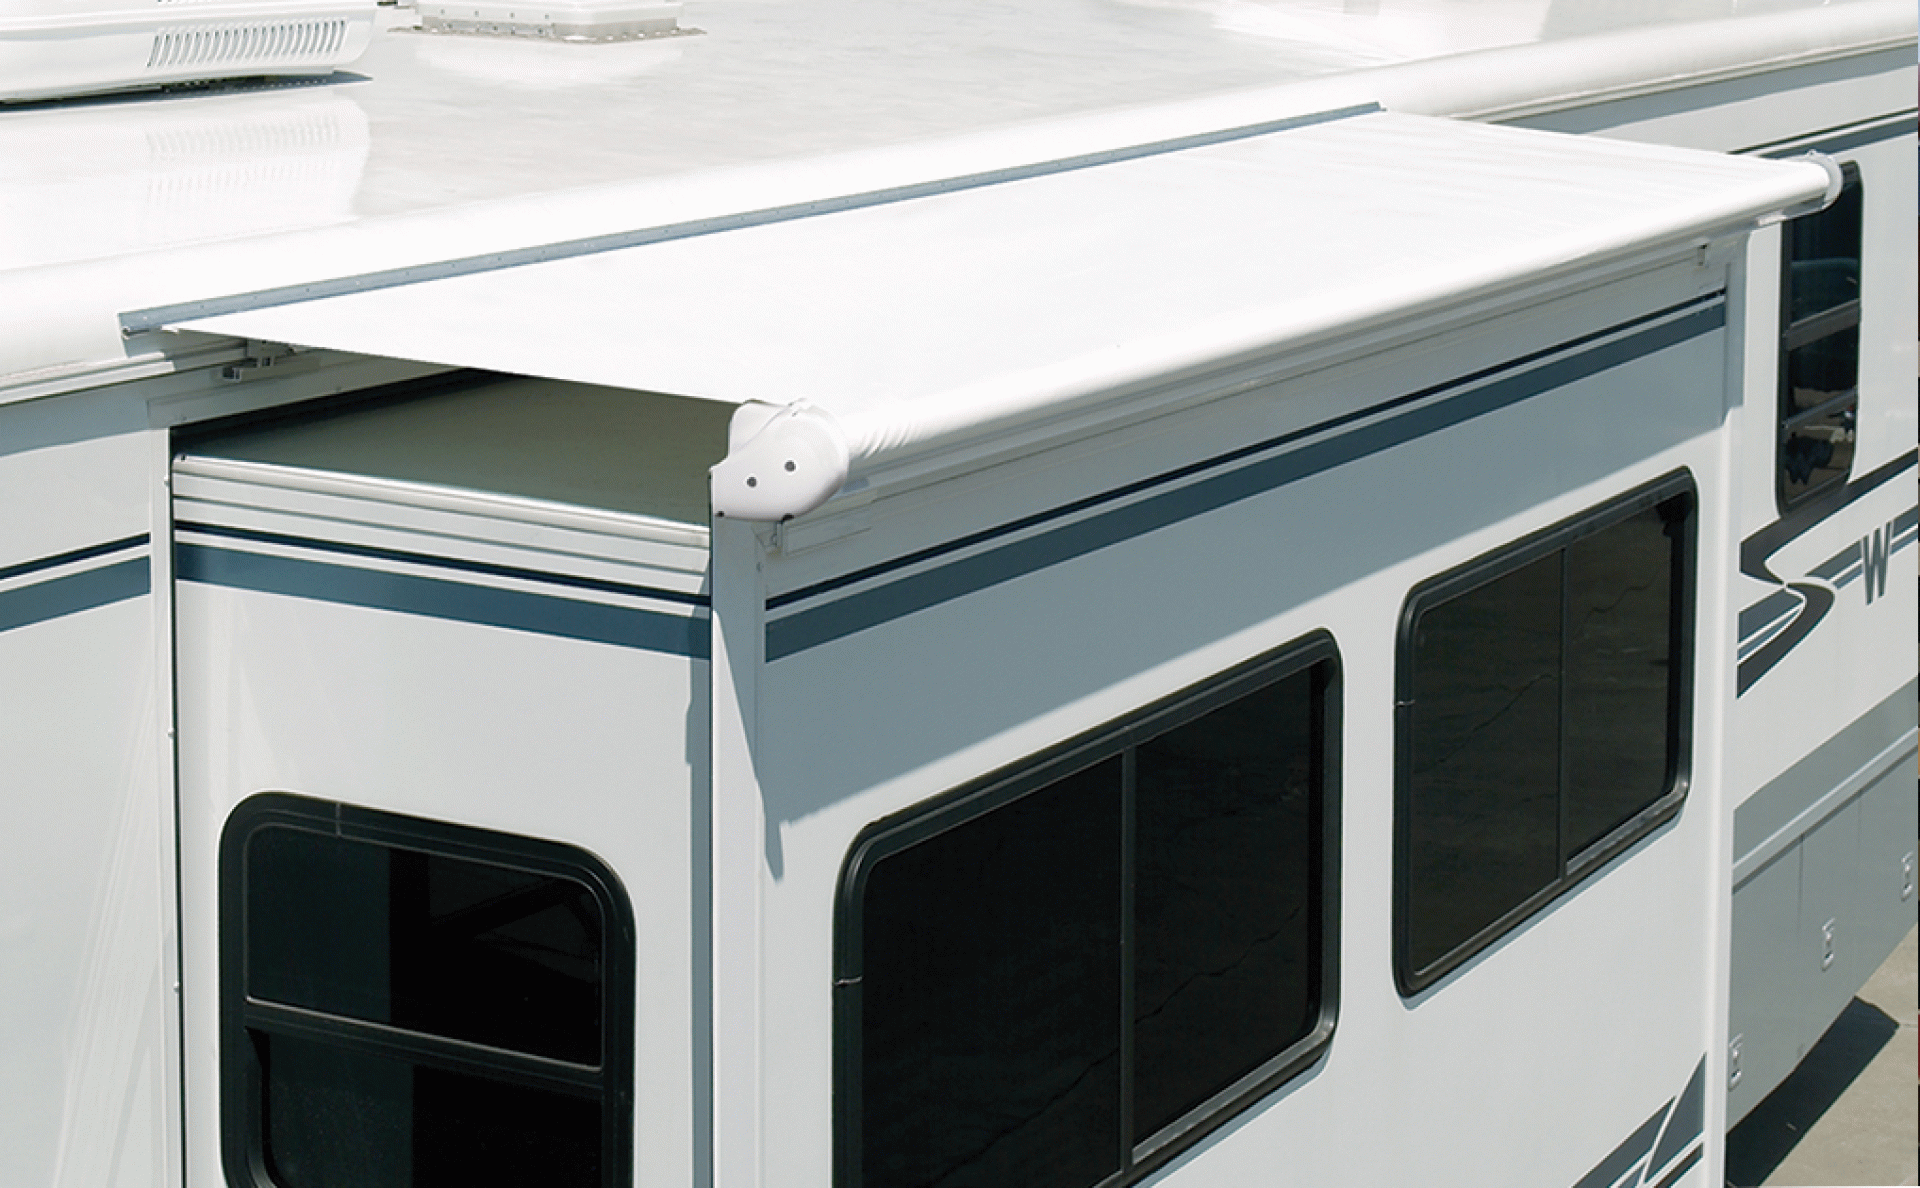 CAREFREE OF COLORADO | UQ1410025 | SIDEOUT KOVER III AWNING 134" - 141" ROOF RANGE WHITE VINYL FABRIC & DEFLECTOR